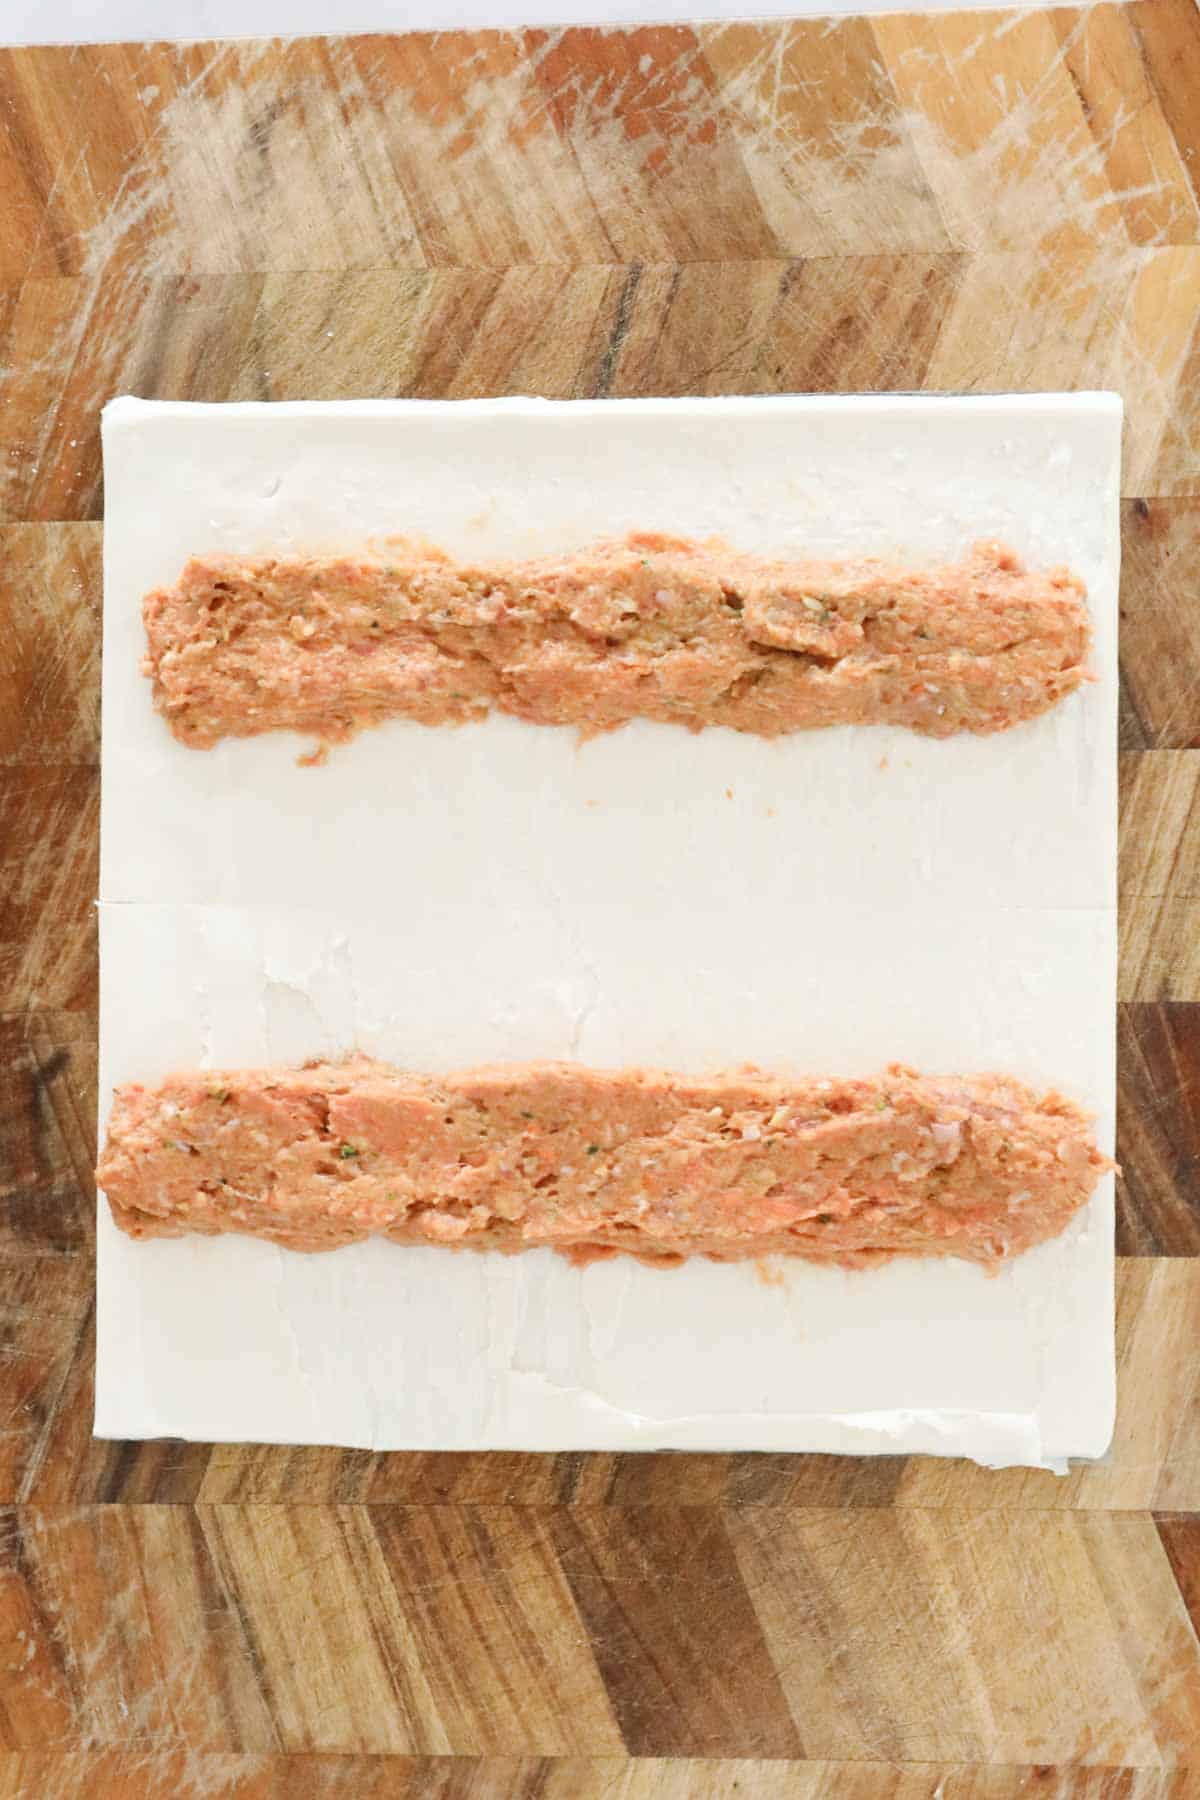 Pork mince mix placed in two long lines on a pastry sheet cut in half.